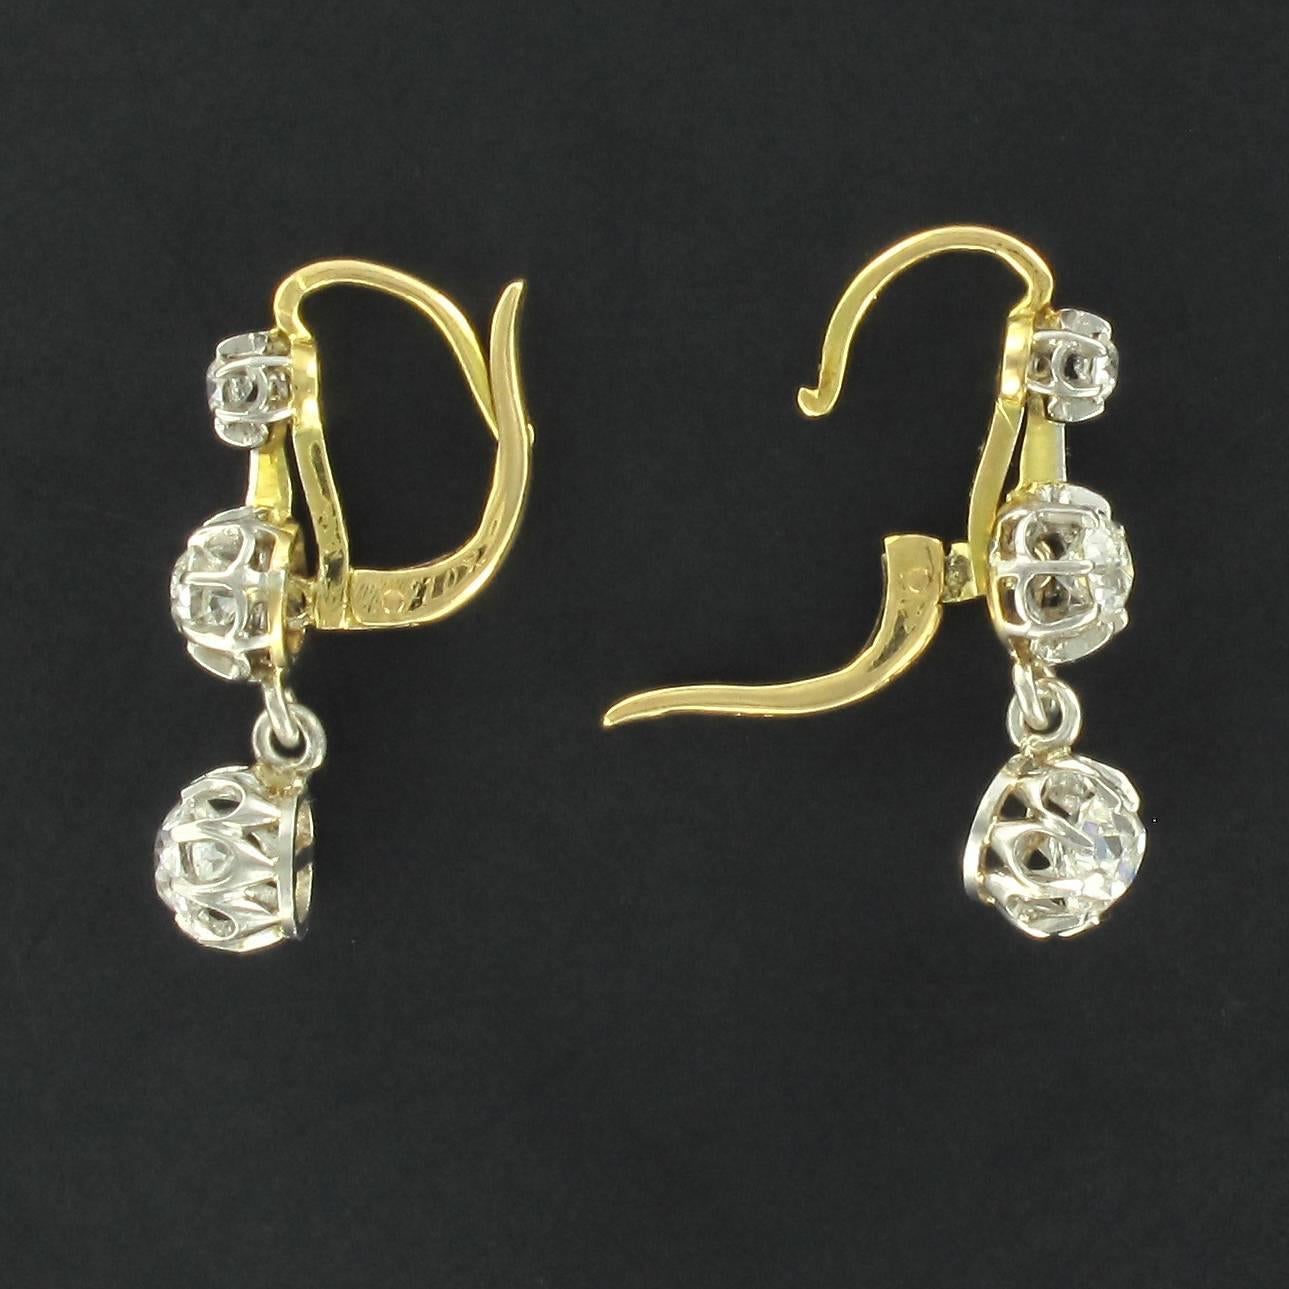 For pierced ears.
Earrings in 18 carats yellow and white gold, eagle head hallmark.

Sublime, each white gold earring is composed of 3 antique cushion cut and brillant cut diamonds set with claws. The clasp closes at the back. 

Total weight of the